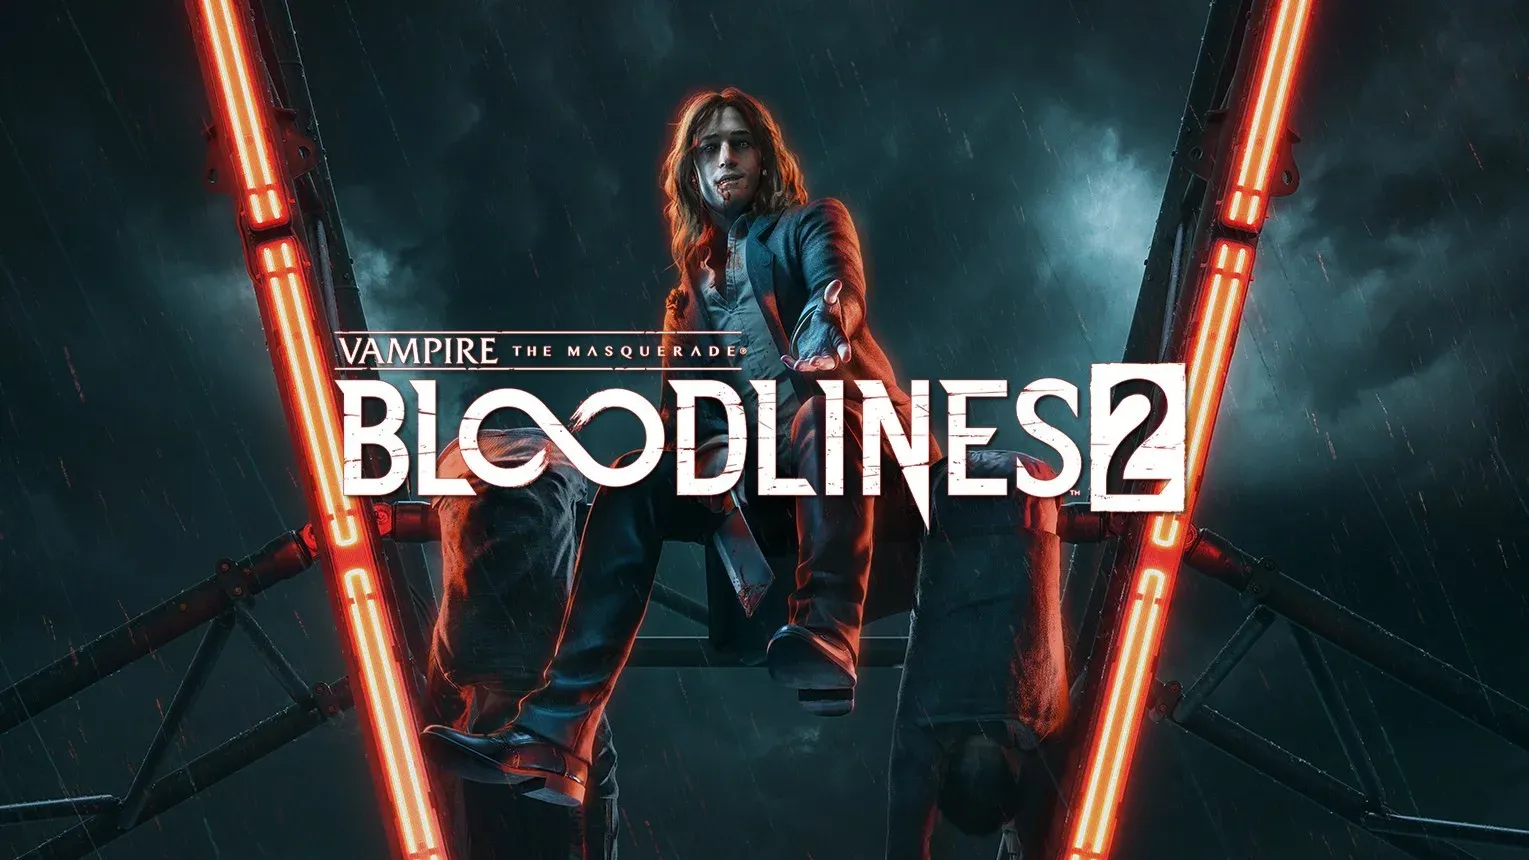 After 15 years, Vampire: The Masquerade — Bloodlines 2 announced